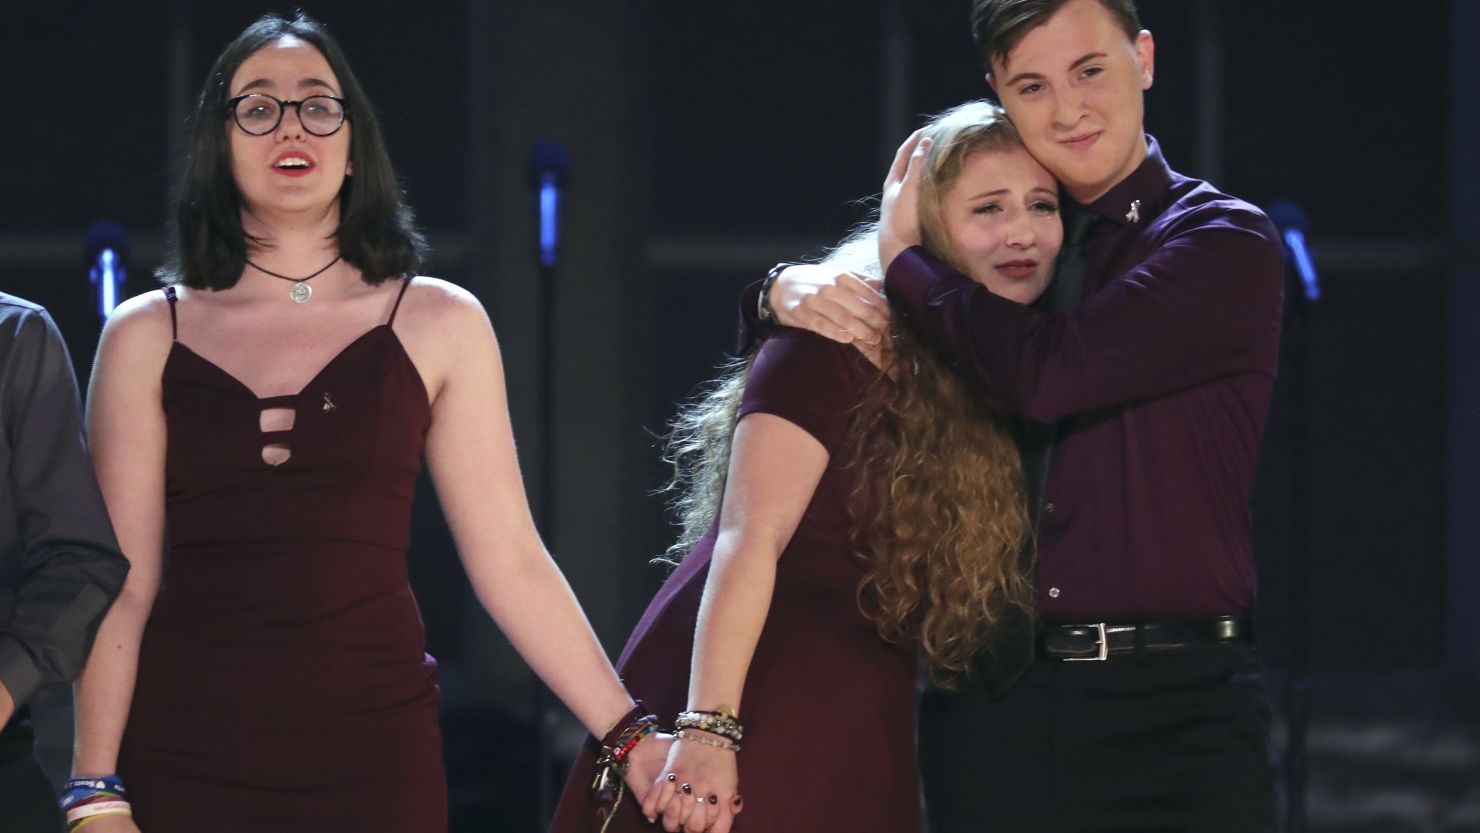 Students from the Marjory Stoneman Douglas High School drama department react after performing "Seasons of Love" at the 72nd annual Tony Awards at Radio City Music Hall on Sunday, June 10, 2018, in New York. (Photo by Michael Zorn/Invision/AP)